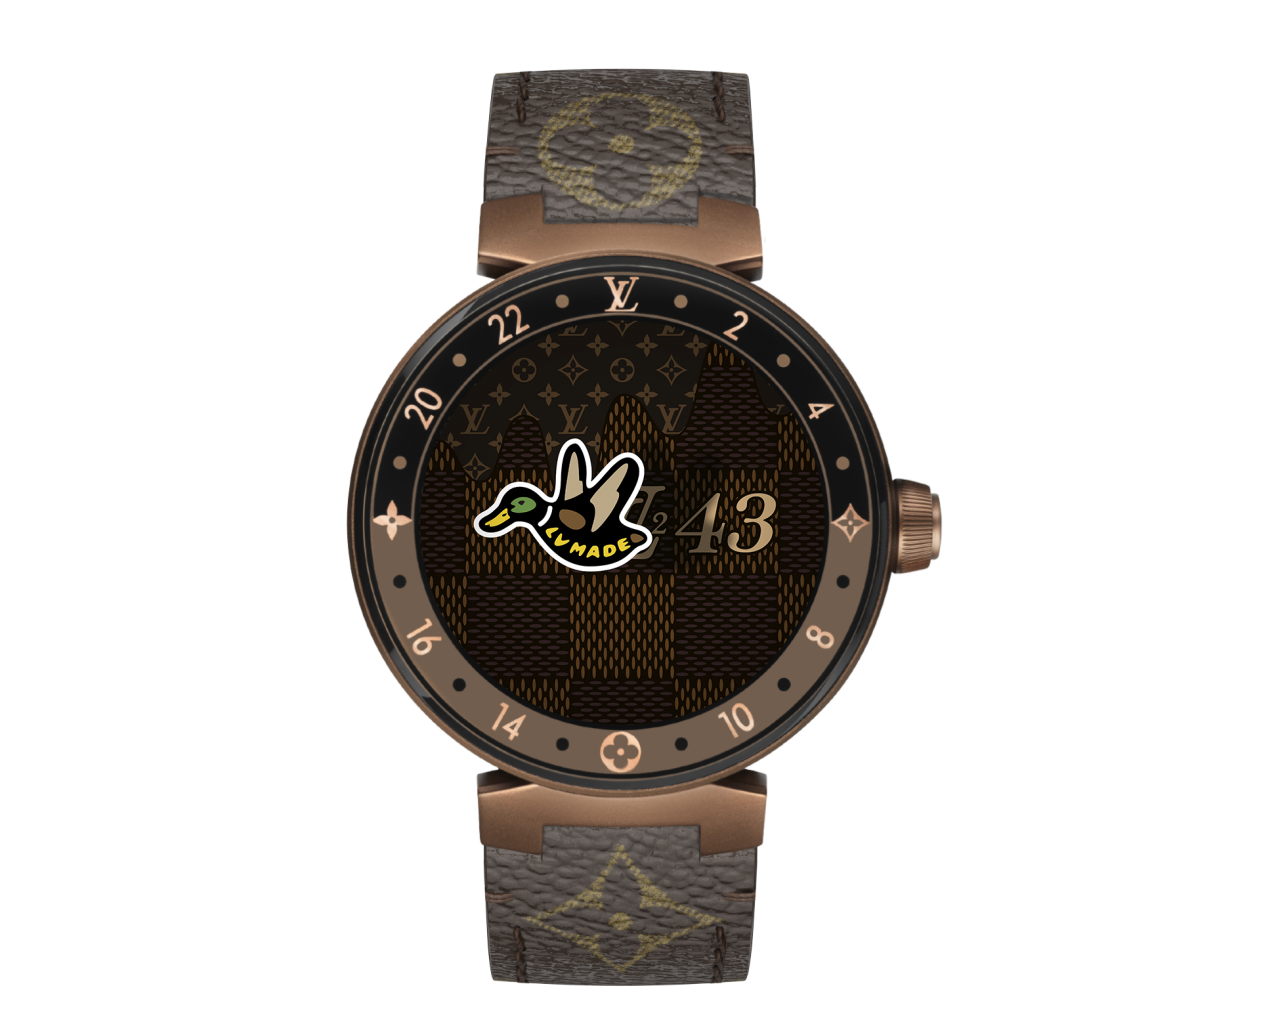 The Final Wave of LV2 x Nigo is Here